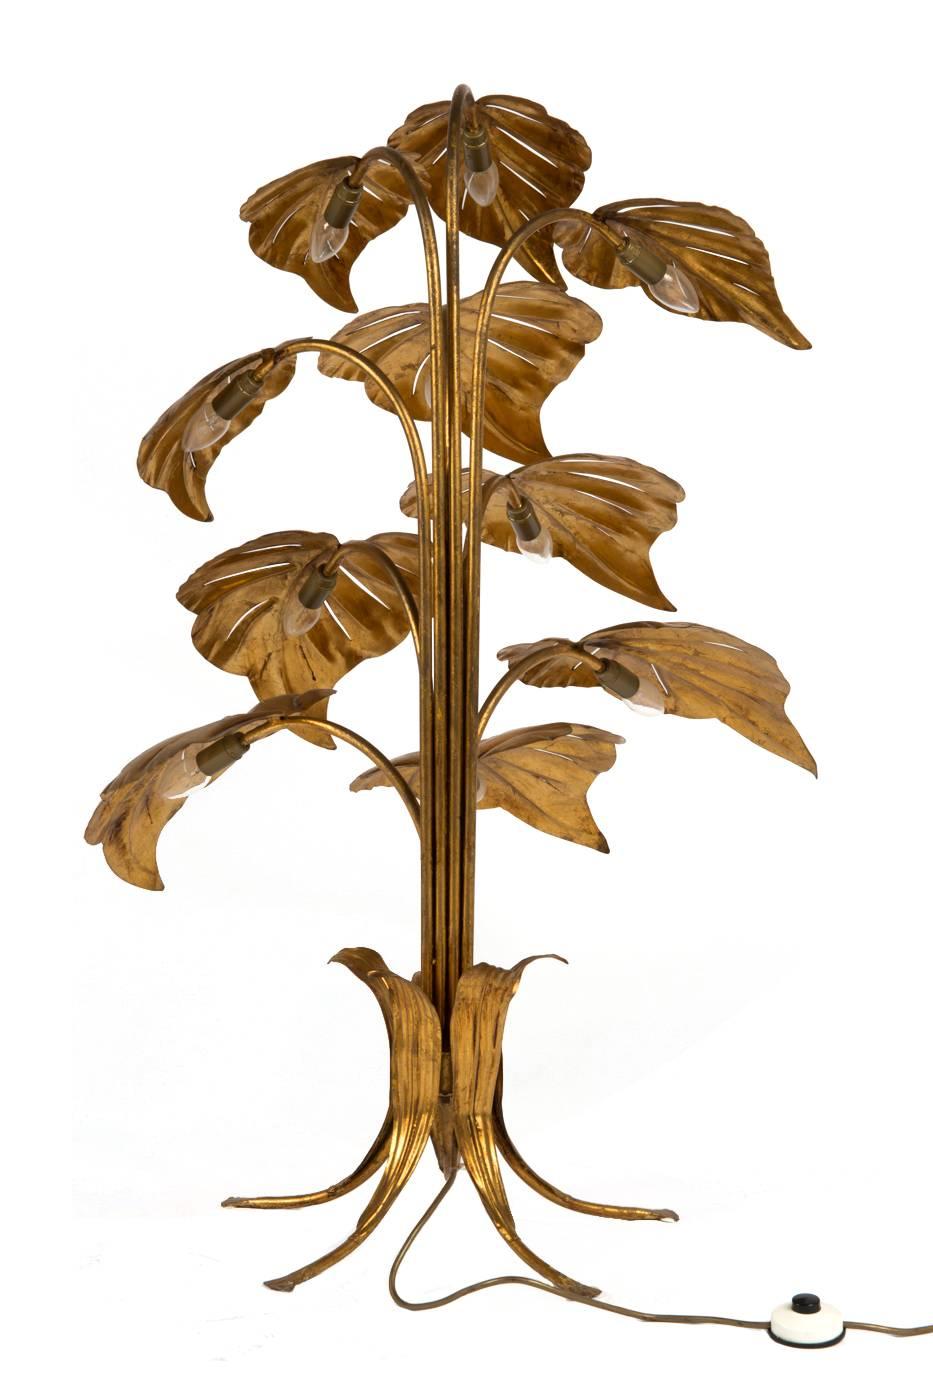 A beautiful French gilt metal plant floor lamp, with ten large leaves each with a bulb underneath, supported by gilt metal stem and base. Re-wired and PAT tested with antique gold cord flex, foot switch and PAT tested.